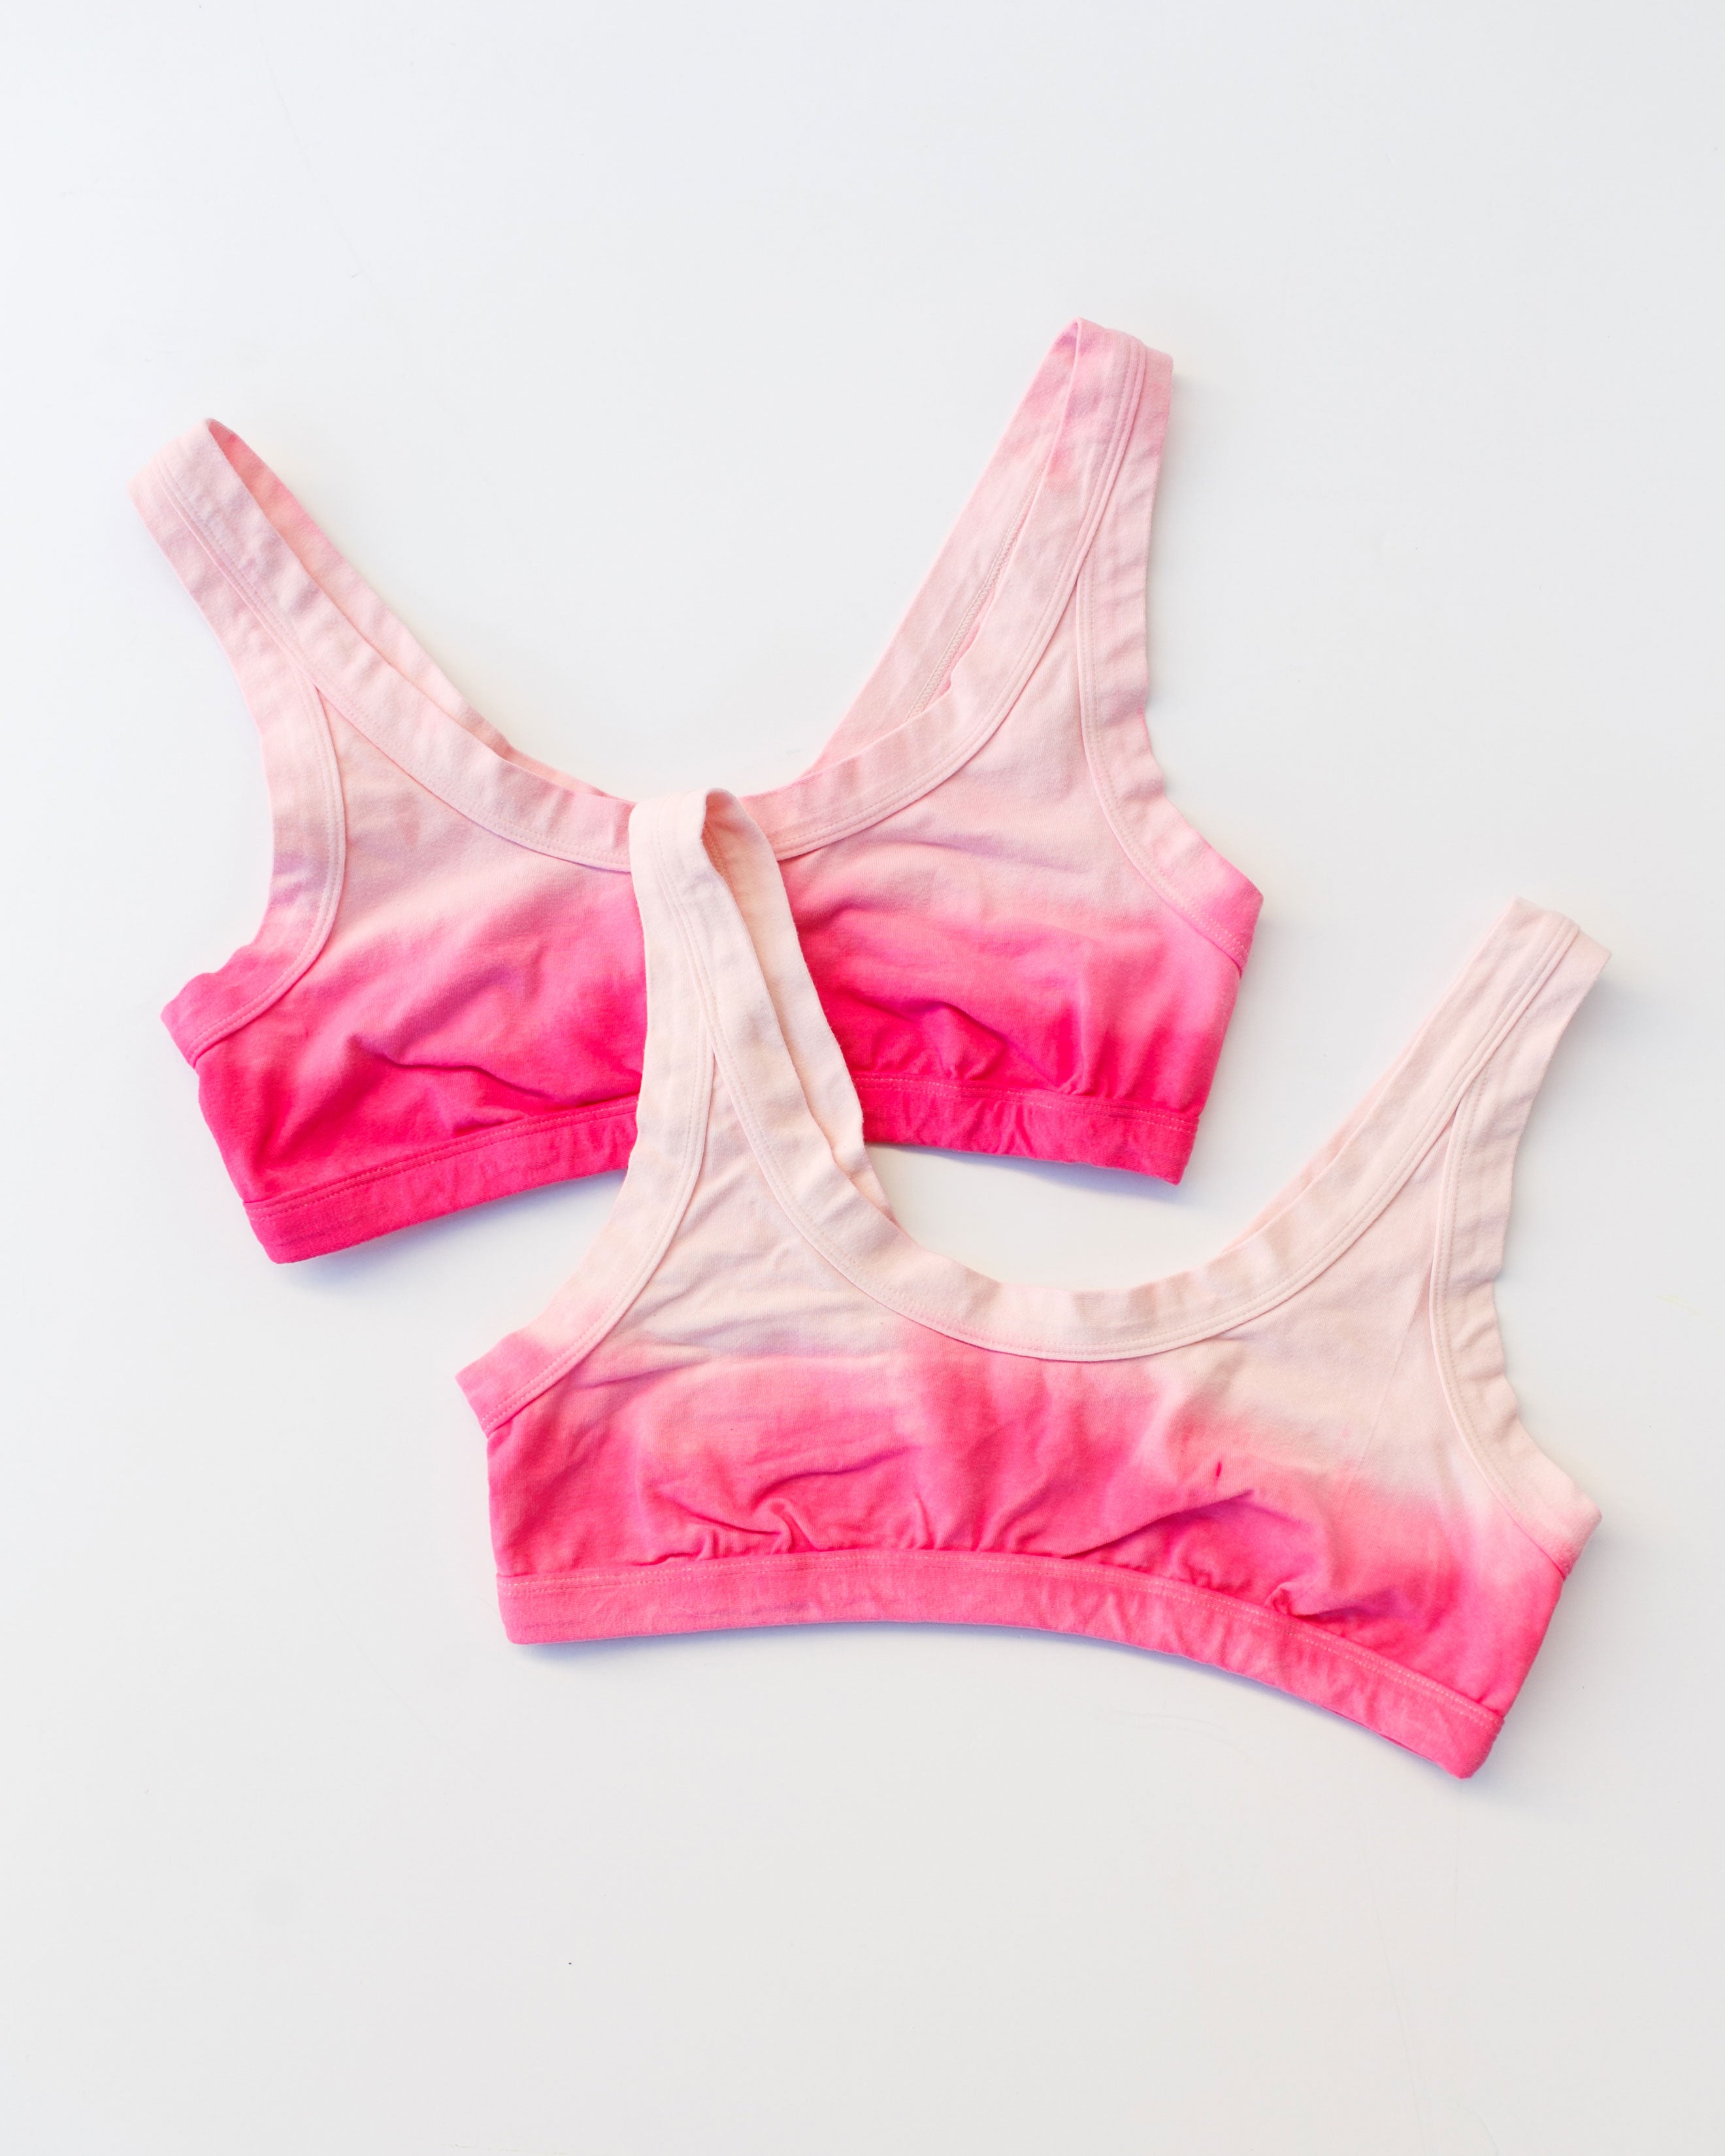 Flat lay of Thunderpants Organic Cotton Bralette in Valentine's Day Dip Dye ombre pinks.